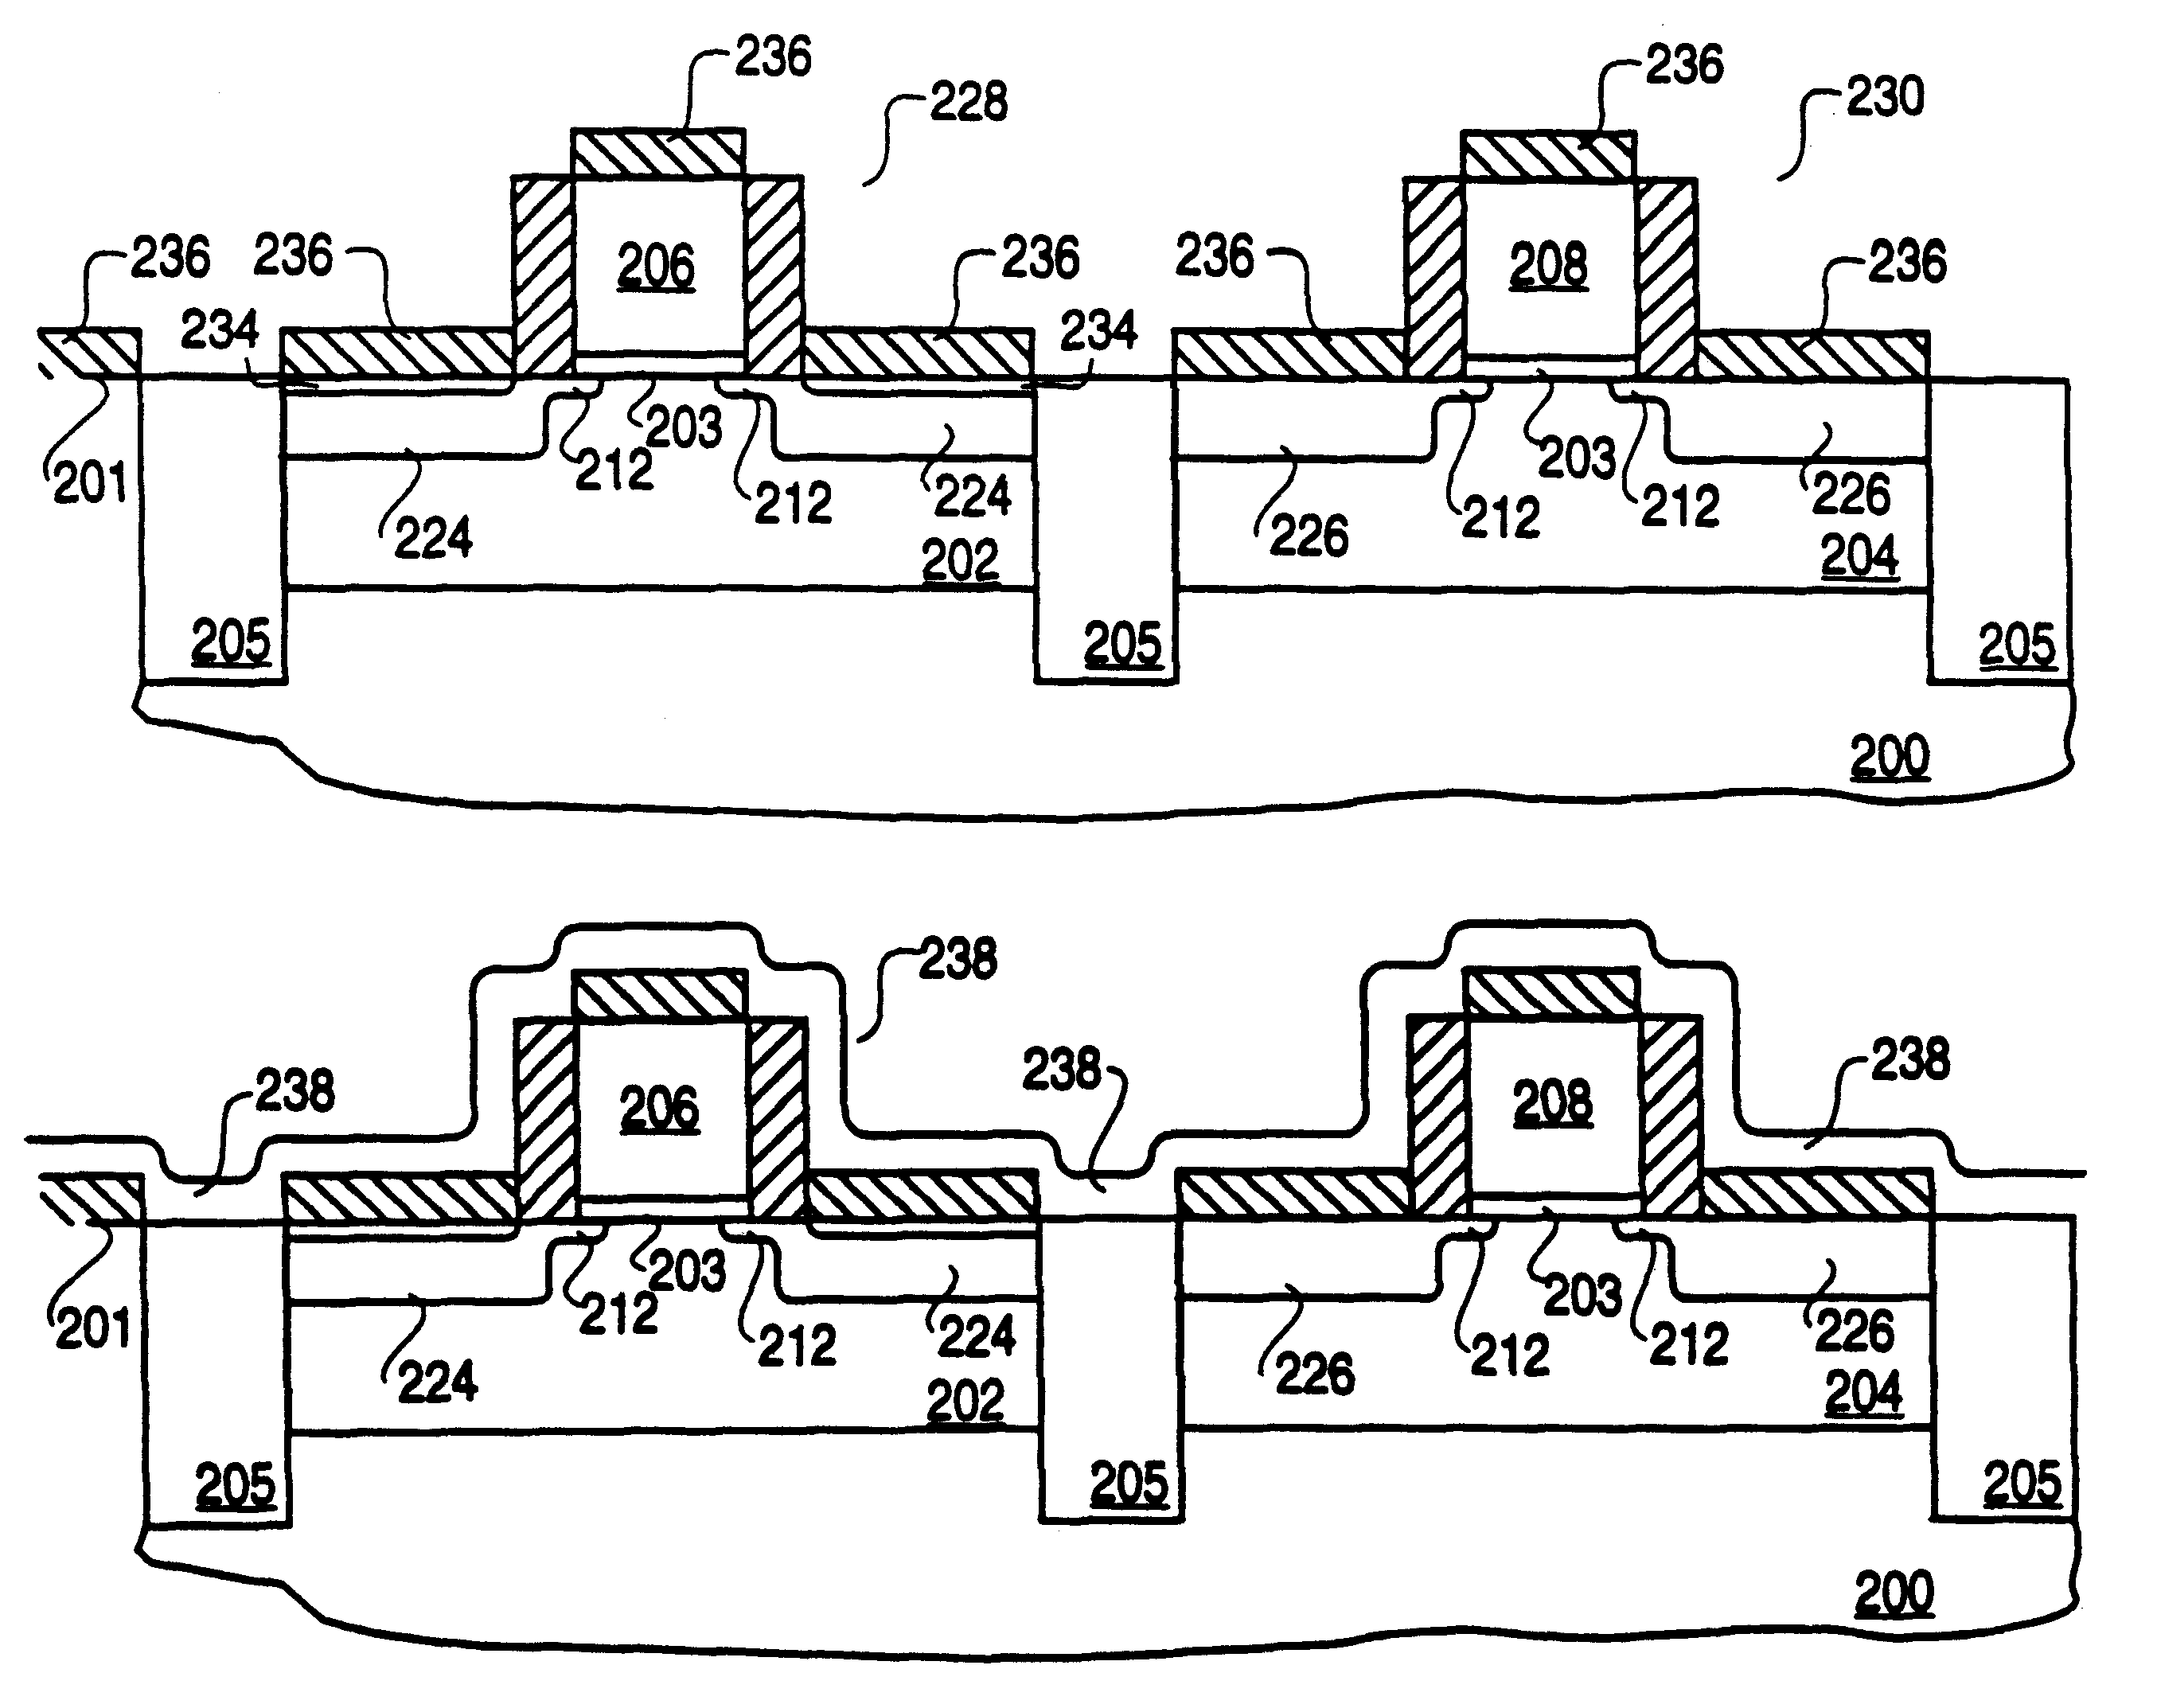 Semiconductor device having deposited silicon regions and a method of fabrication